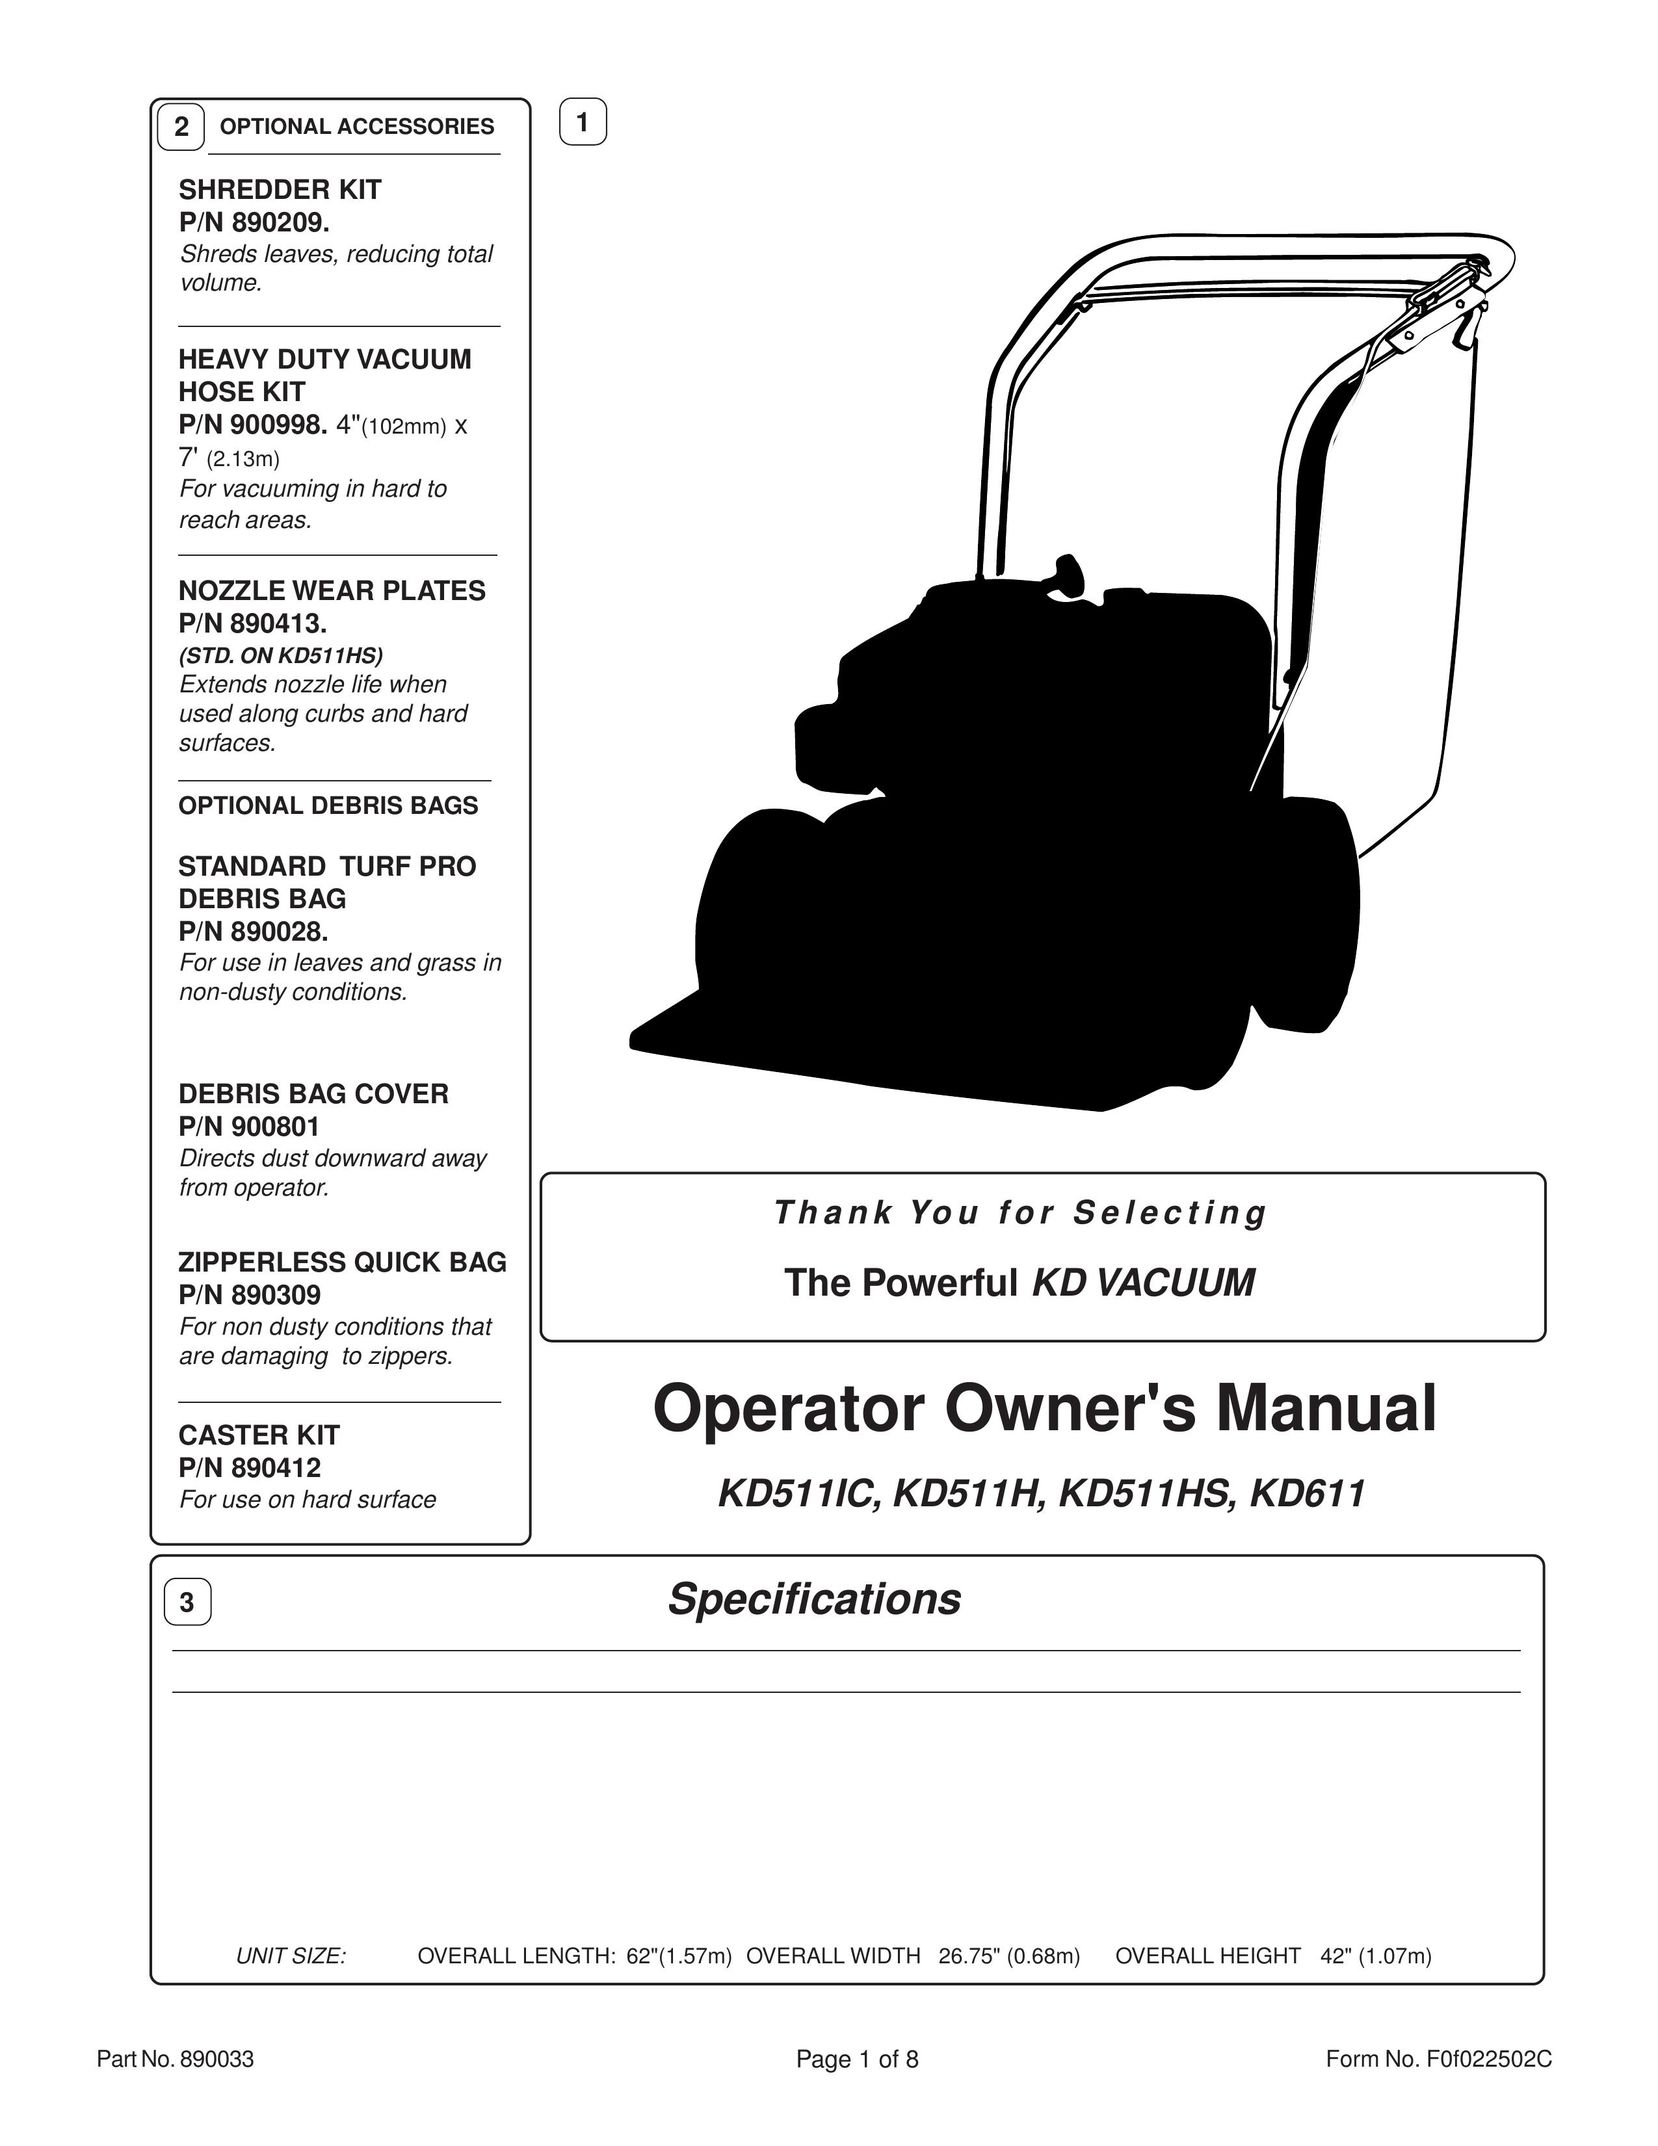 Billy Goat KD511HS Vacuum Cleaner User Manual